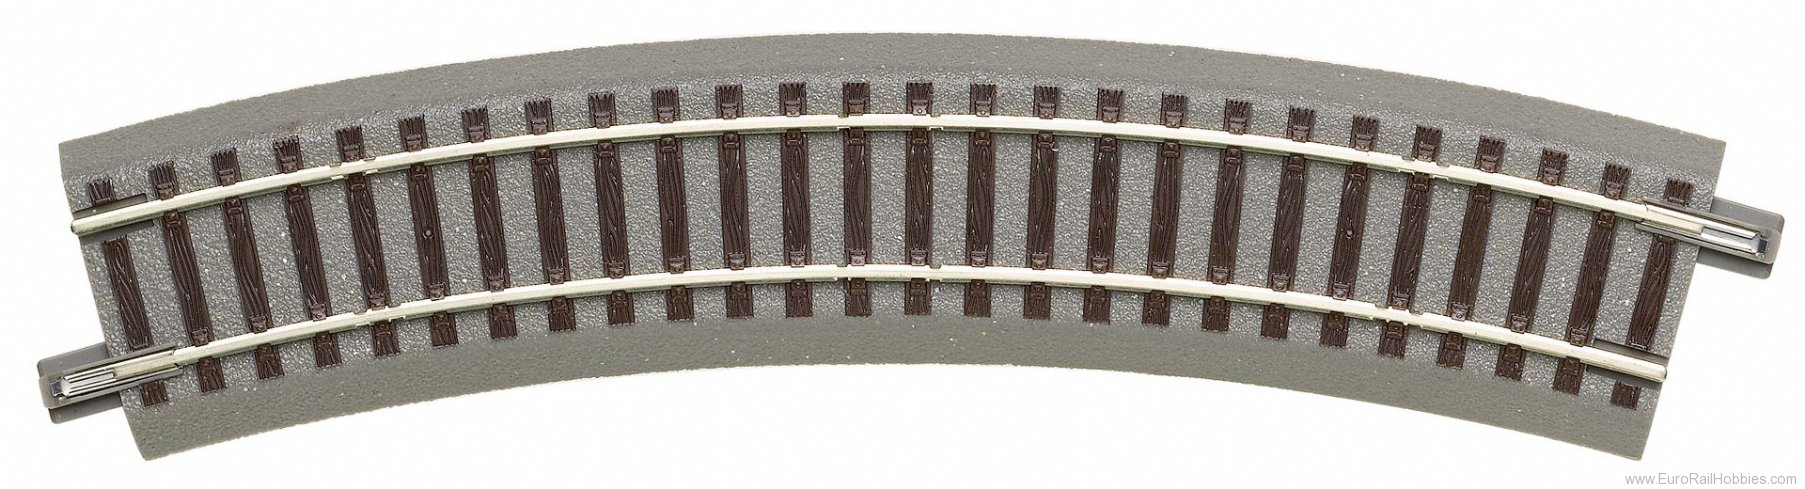 Roco 61122 geoLINE Curved Track R2           